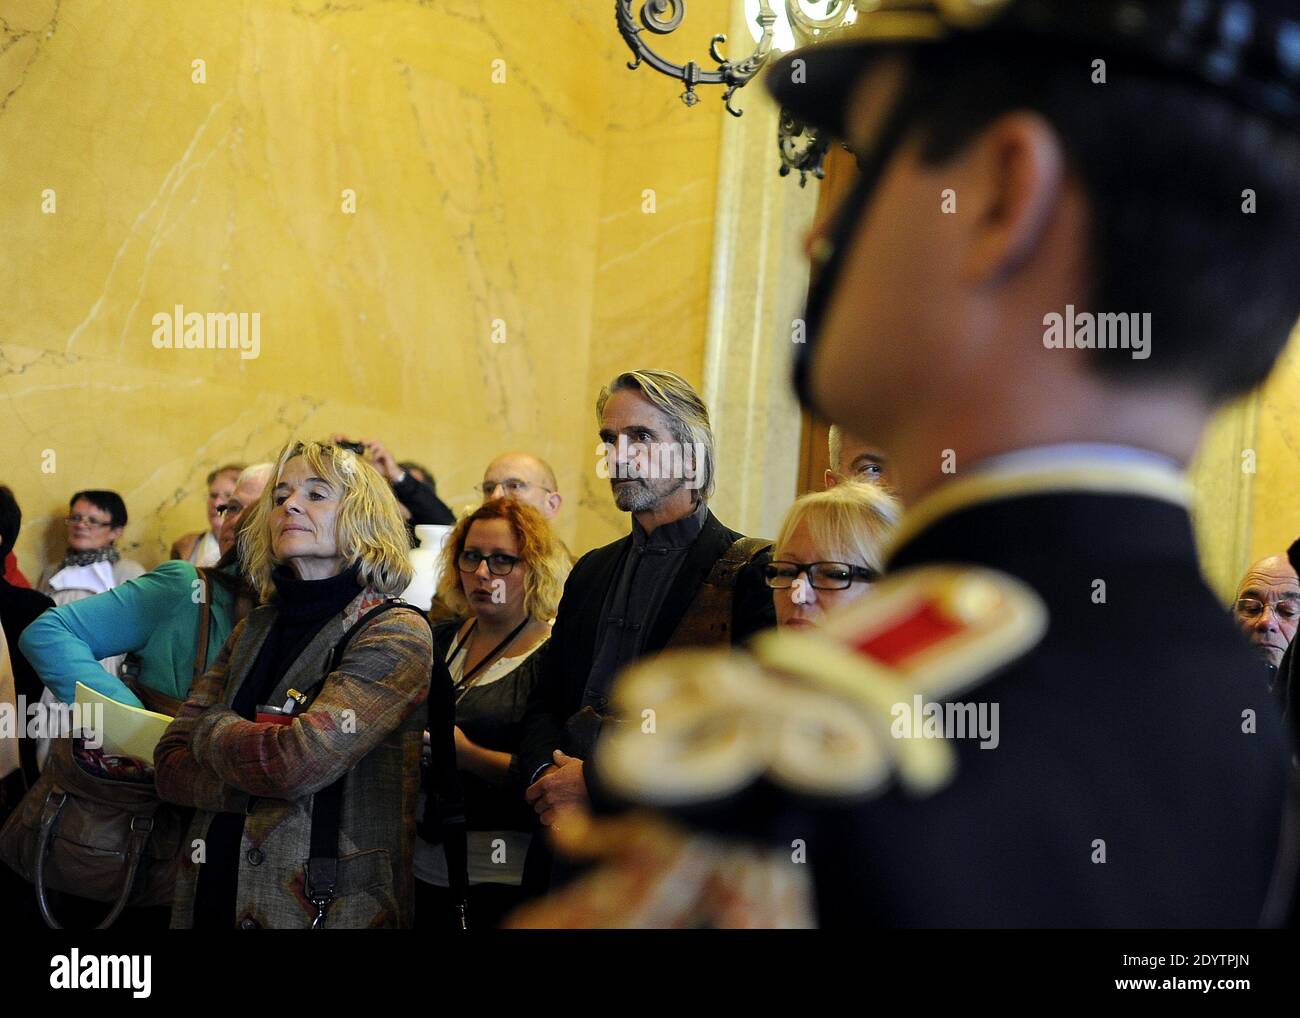 British actor/producer Jeremy Irons along with his wife Sinead Cusack arrives to the French National Assembly to present his 2012 environmental documentary film 'Trashed', in Paris, France on September 18, 2013. Photo by Mousse/ABACAPRESS.COM Stock Photo